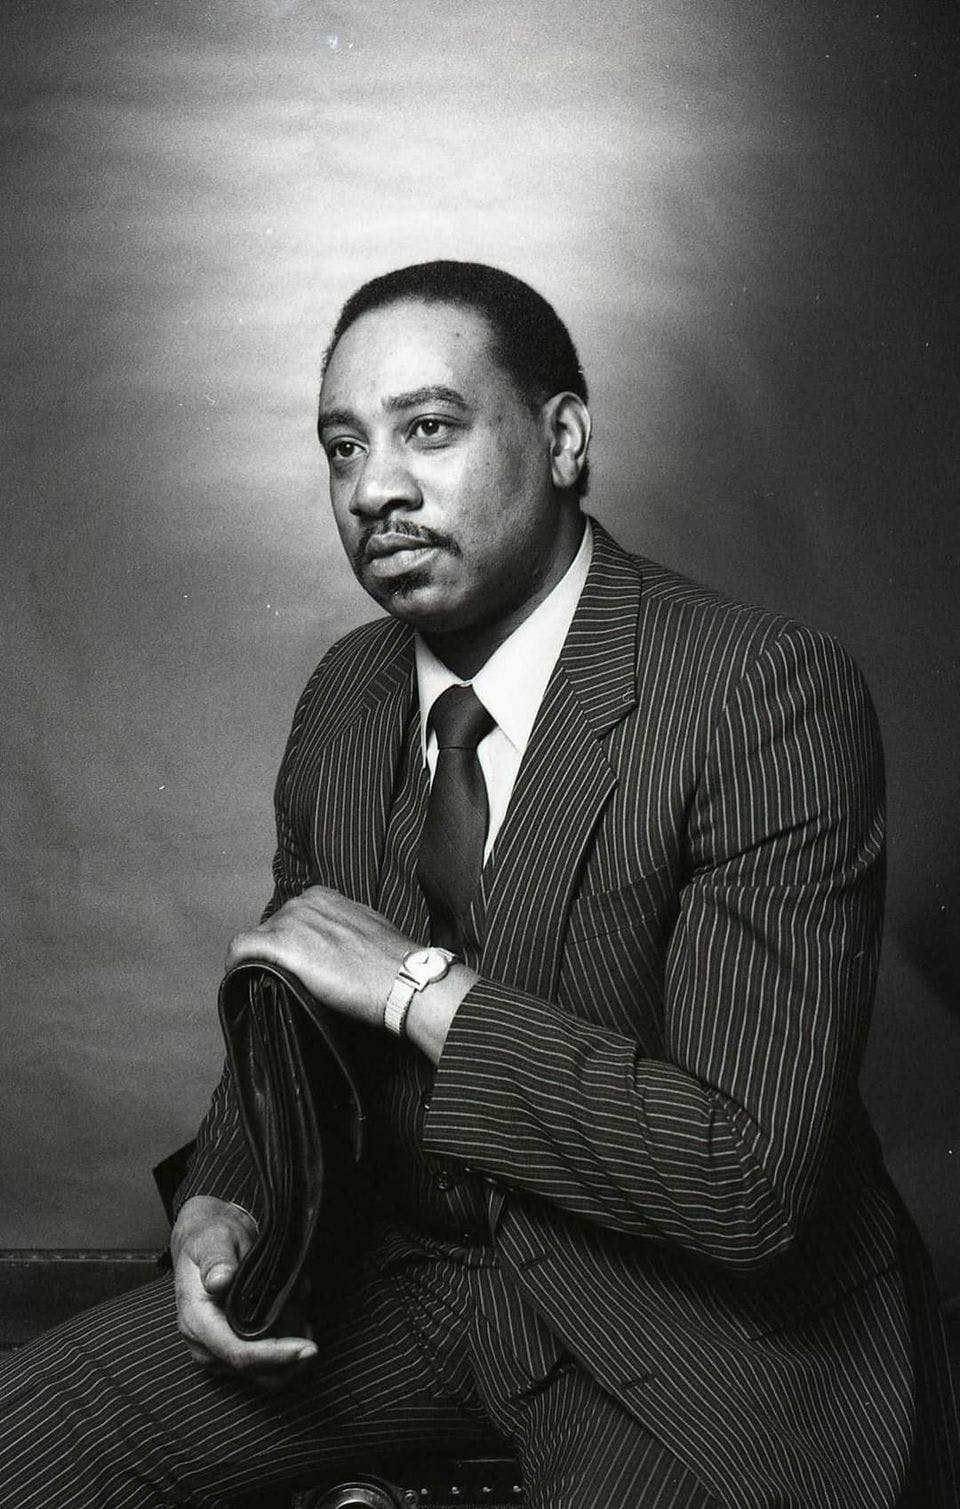 Tee Dennard wears a suit and poses for a studio portrait in the style of Martin Luther King Jr.